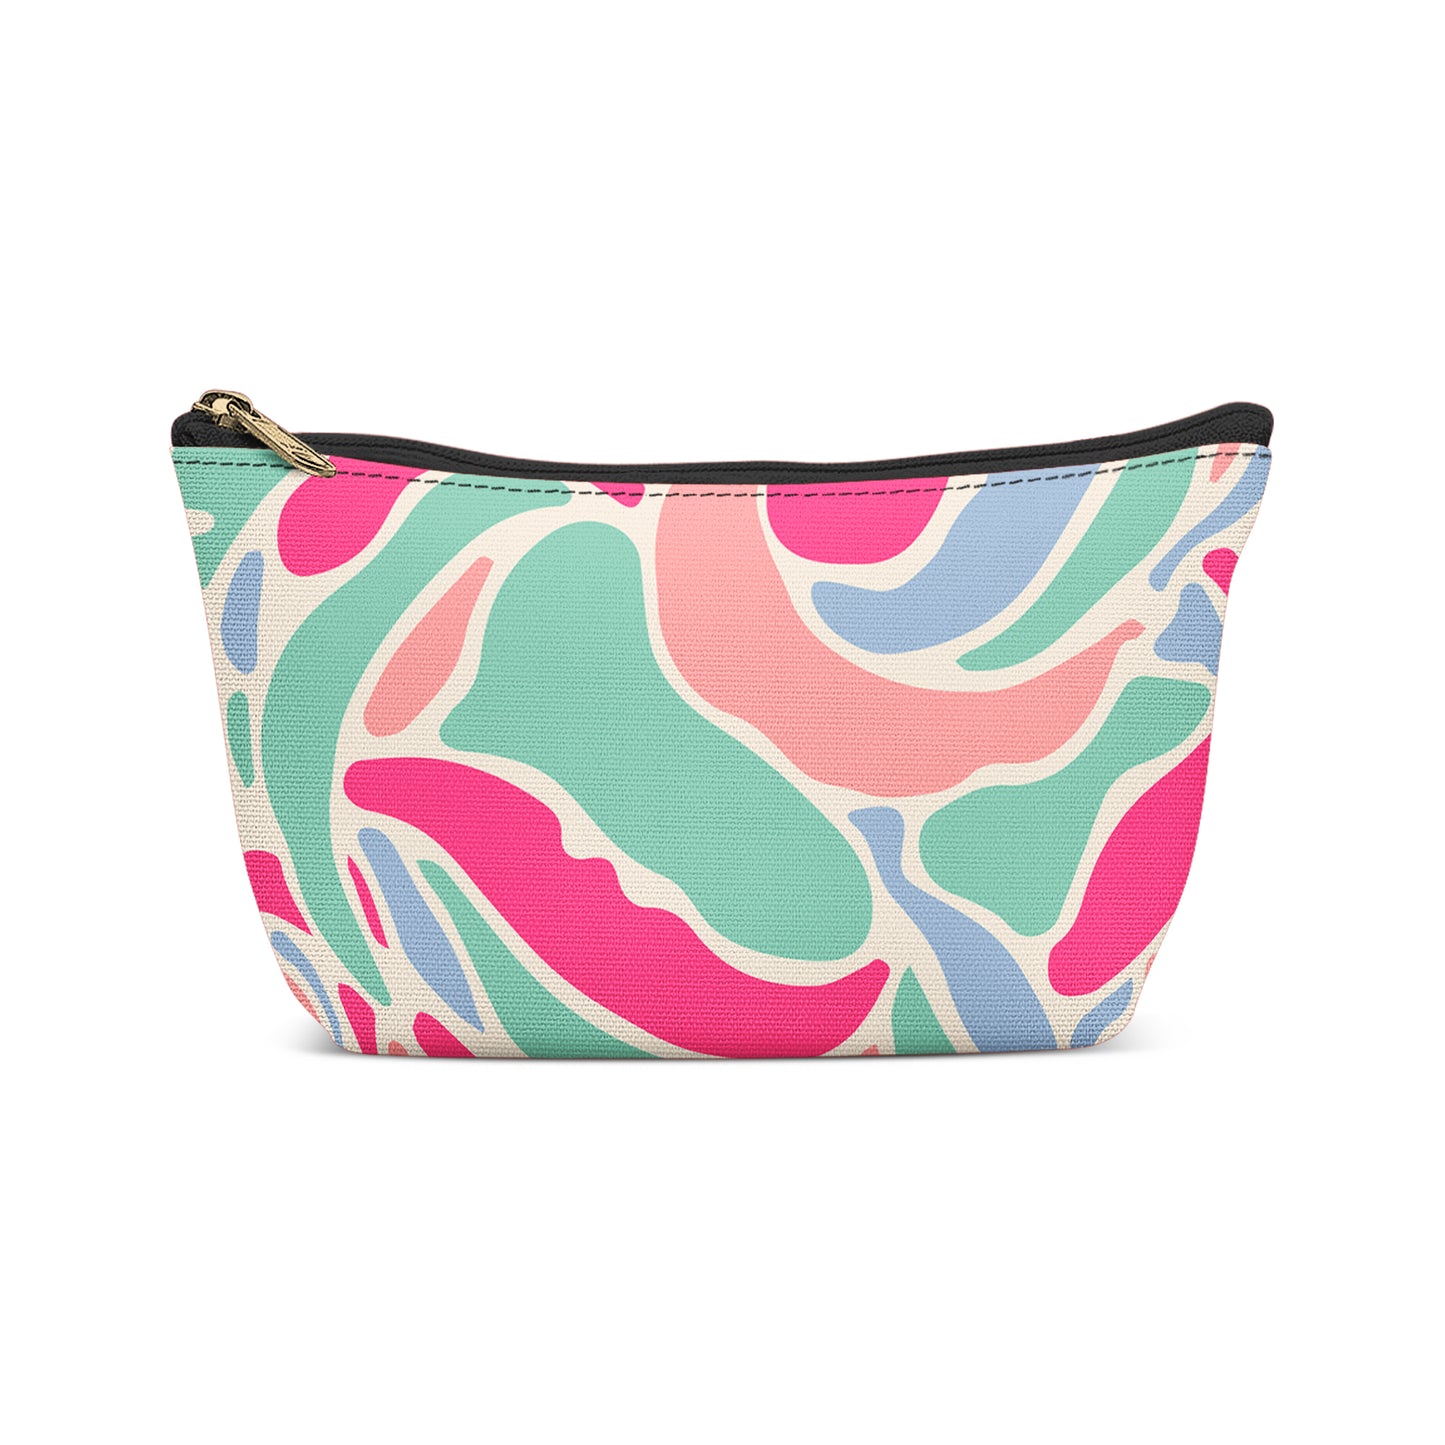 Candy Abstraction Make-up Bag